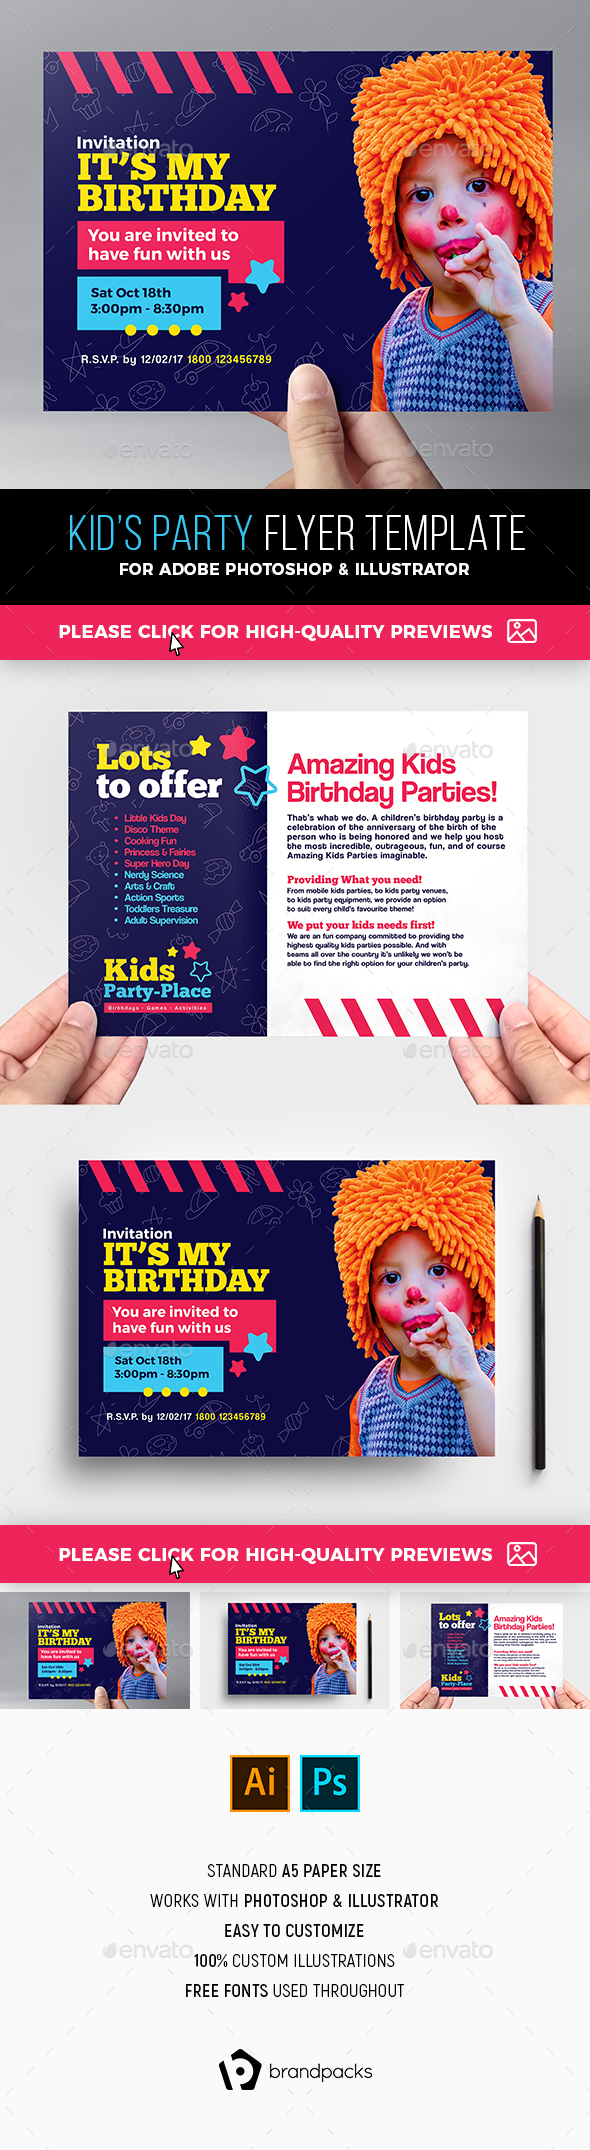 Kid's Party Flyer Template